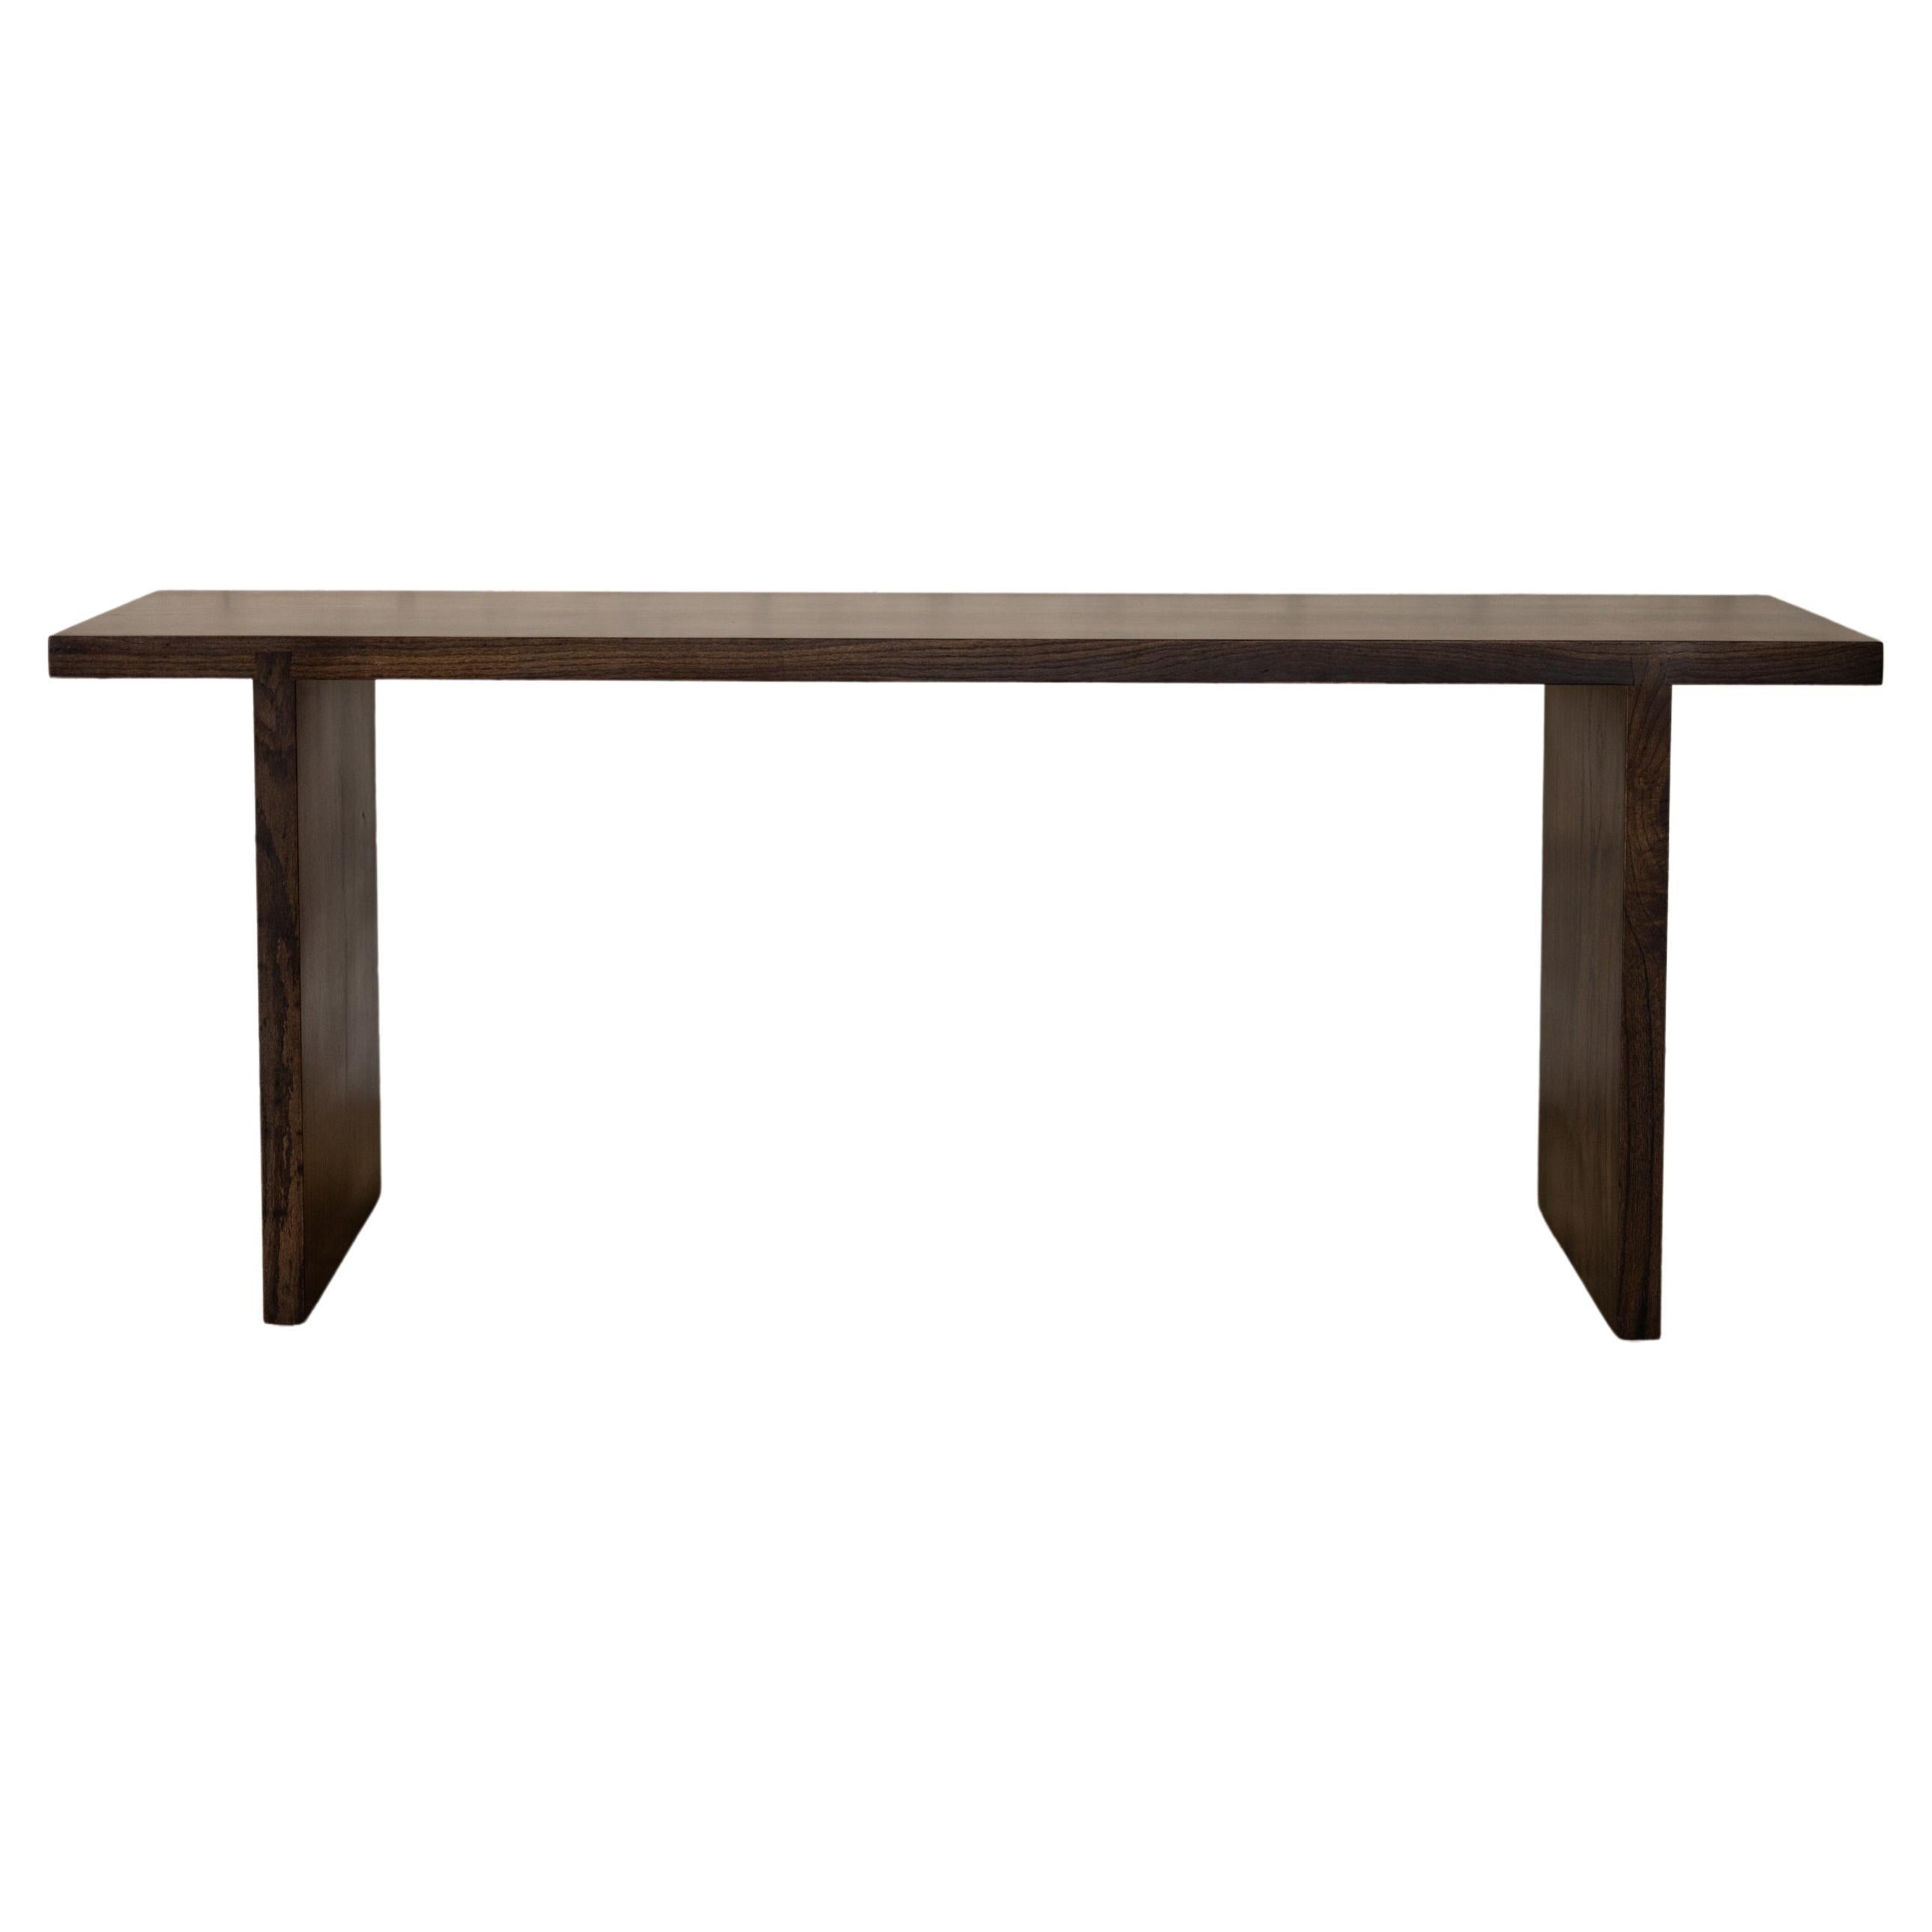 Asian Modern Style Sofa Table Dark Oak Stain, Tiny Shipping Dent + Crack For Sale